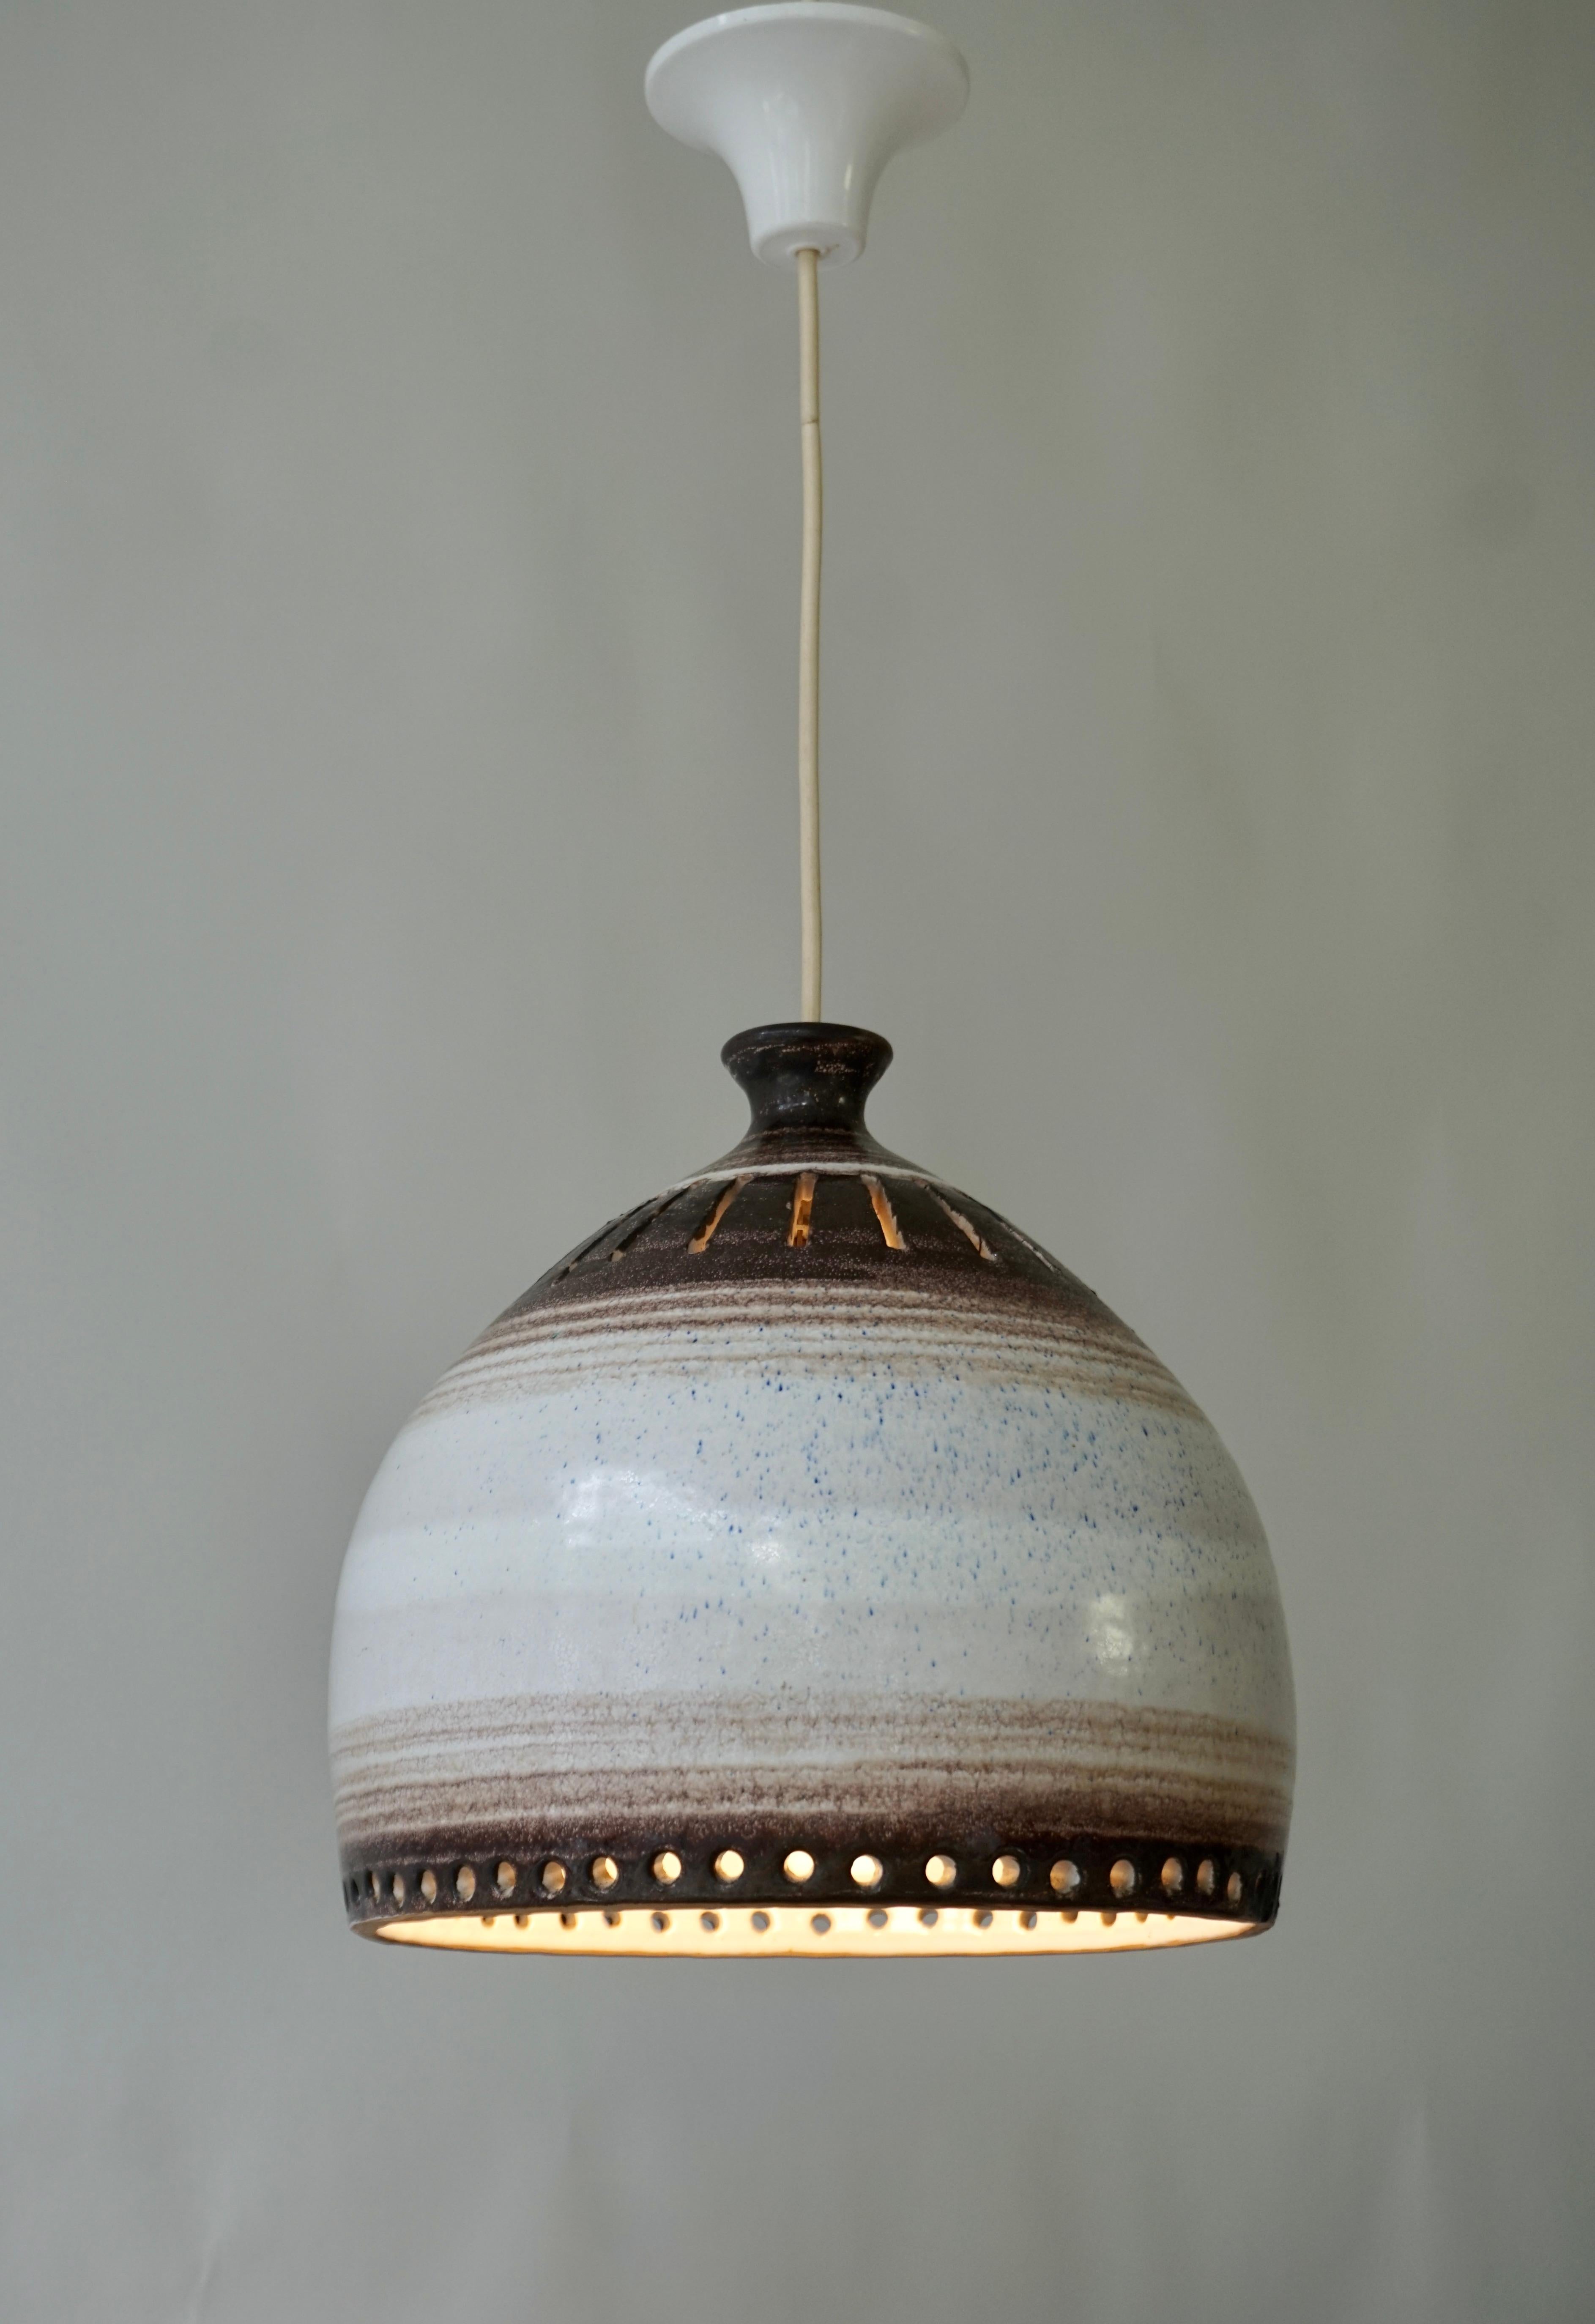 Georges Pelletier ceramic pendant light, attributed to.  

Ceramic lamp, cream-white and brown tones, adorned with perforations and circles.  
French work realized in the 1960-1970s.

Georges Pelletier is famous Belgian ceramist who was active in